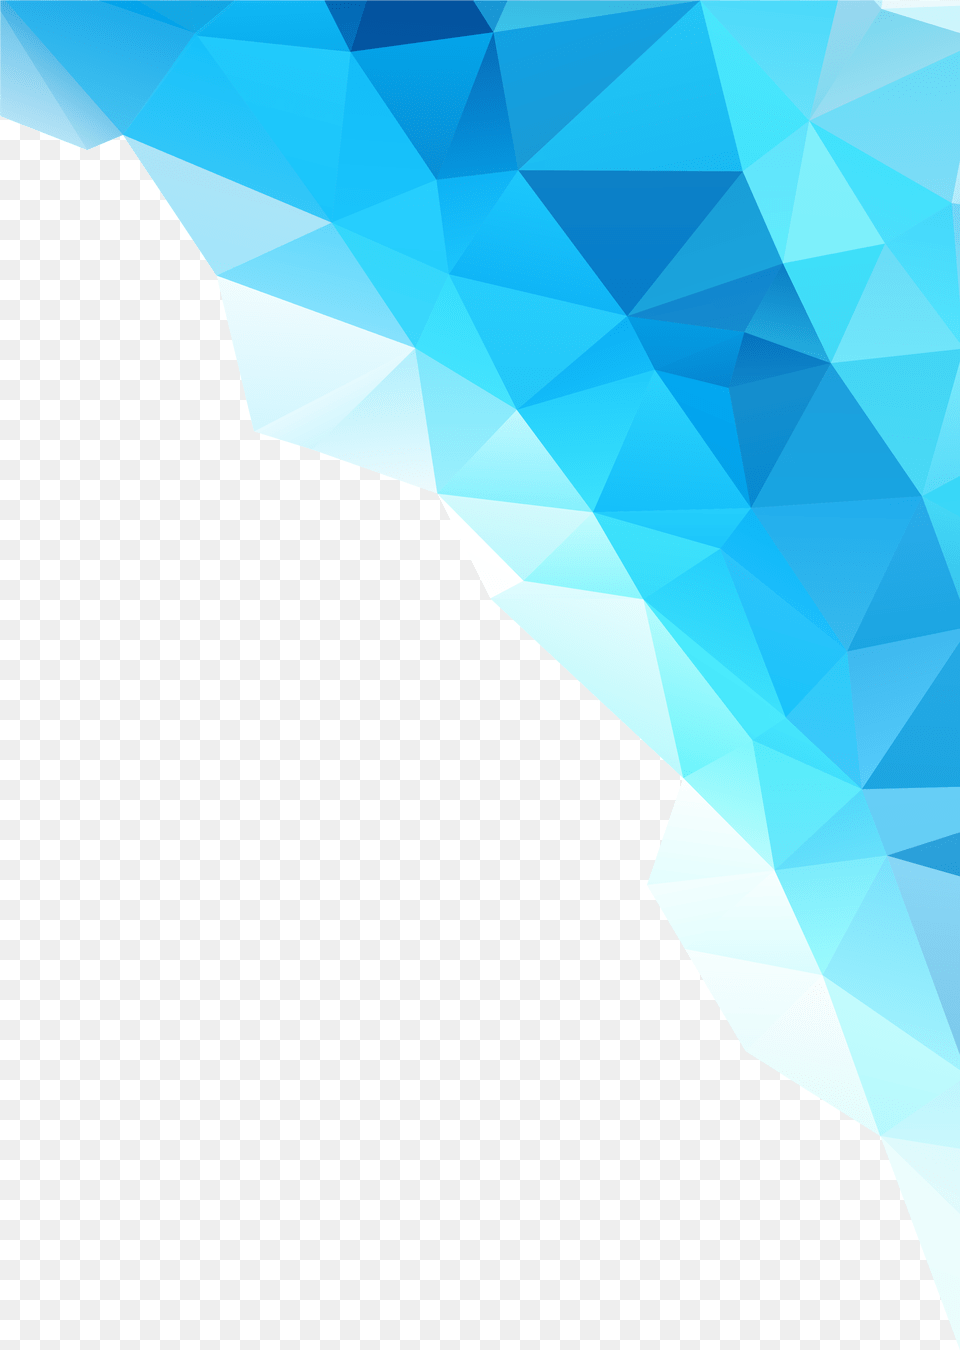 Download Blue Postscript Abstraction Abstract Blue Square, Art, Graphics, Ice, Nature Png Image